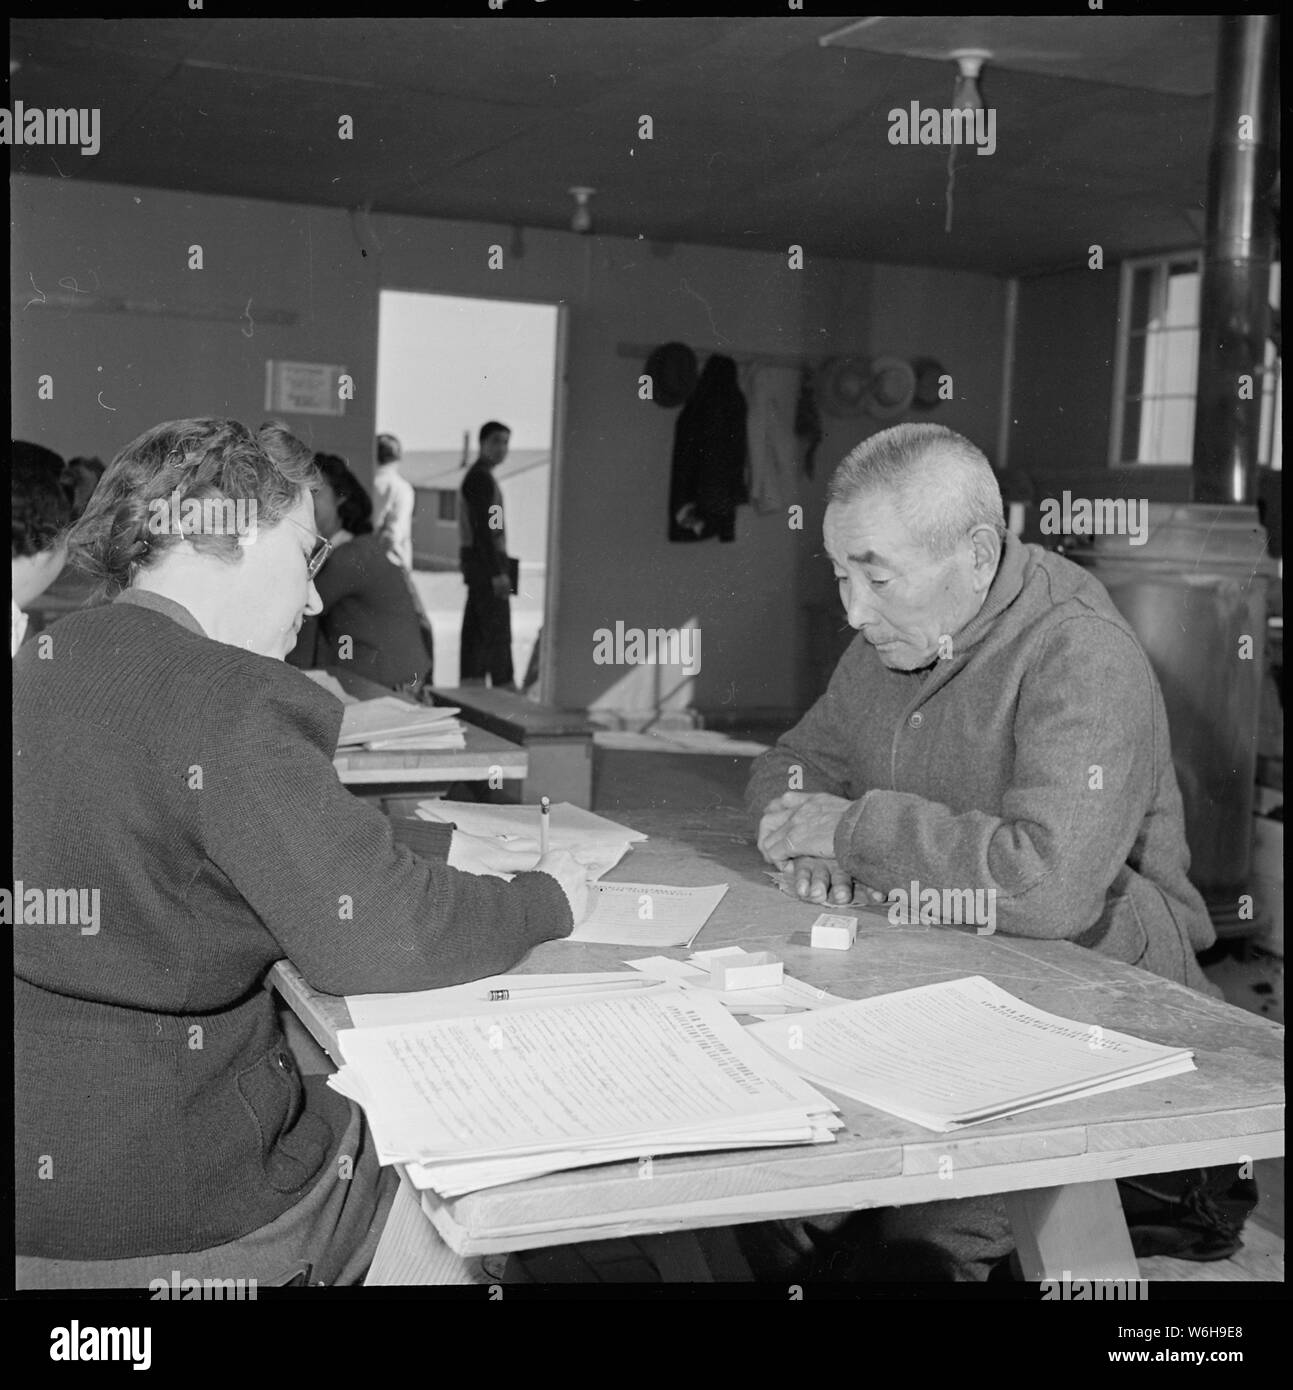 Granada Relocation Center, Amache, Colorado. Elizabeth Evans, Japanese speaking member of the Educa . . .; Scope and content:  The full caption for this photograph reads: Granada Relocation Center, Amache, Colorado. Elizabeth Evans, Japanese speaking member of the Education Department at the Granada Center, assists Shuhei Ichishima, alien Japanese of Nugata, Japan, who had resided in Yuba City, California for 21 years before evacuation to the relocation center. The general registration of all residents in relocation centers was instigated by the Army and the War Relocation Authority as the fir Stock Photo